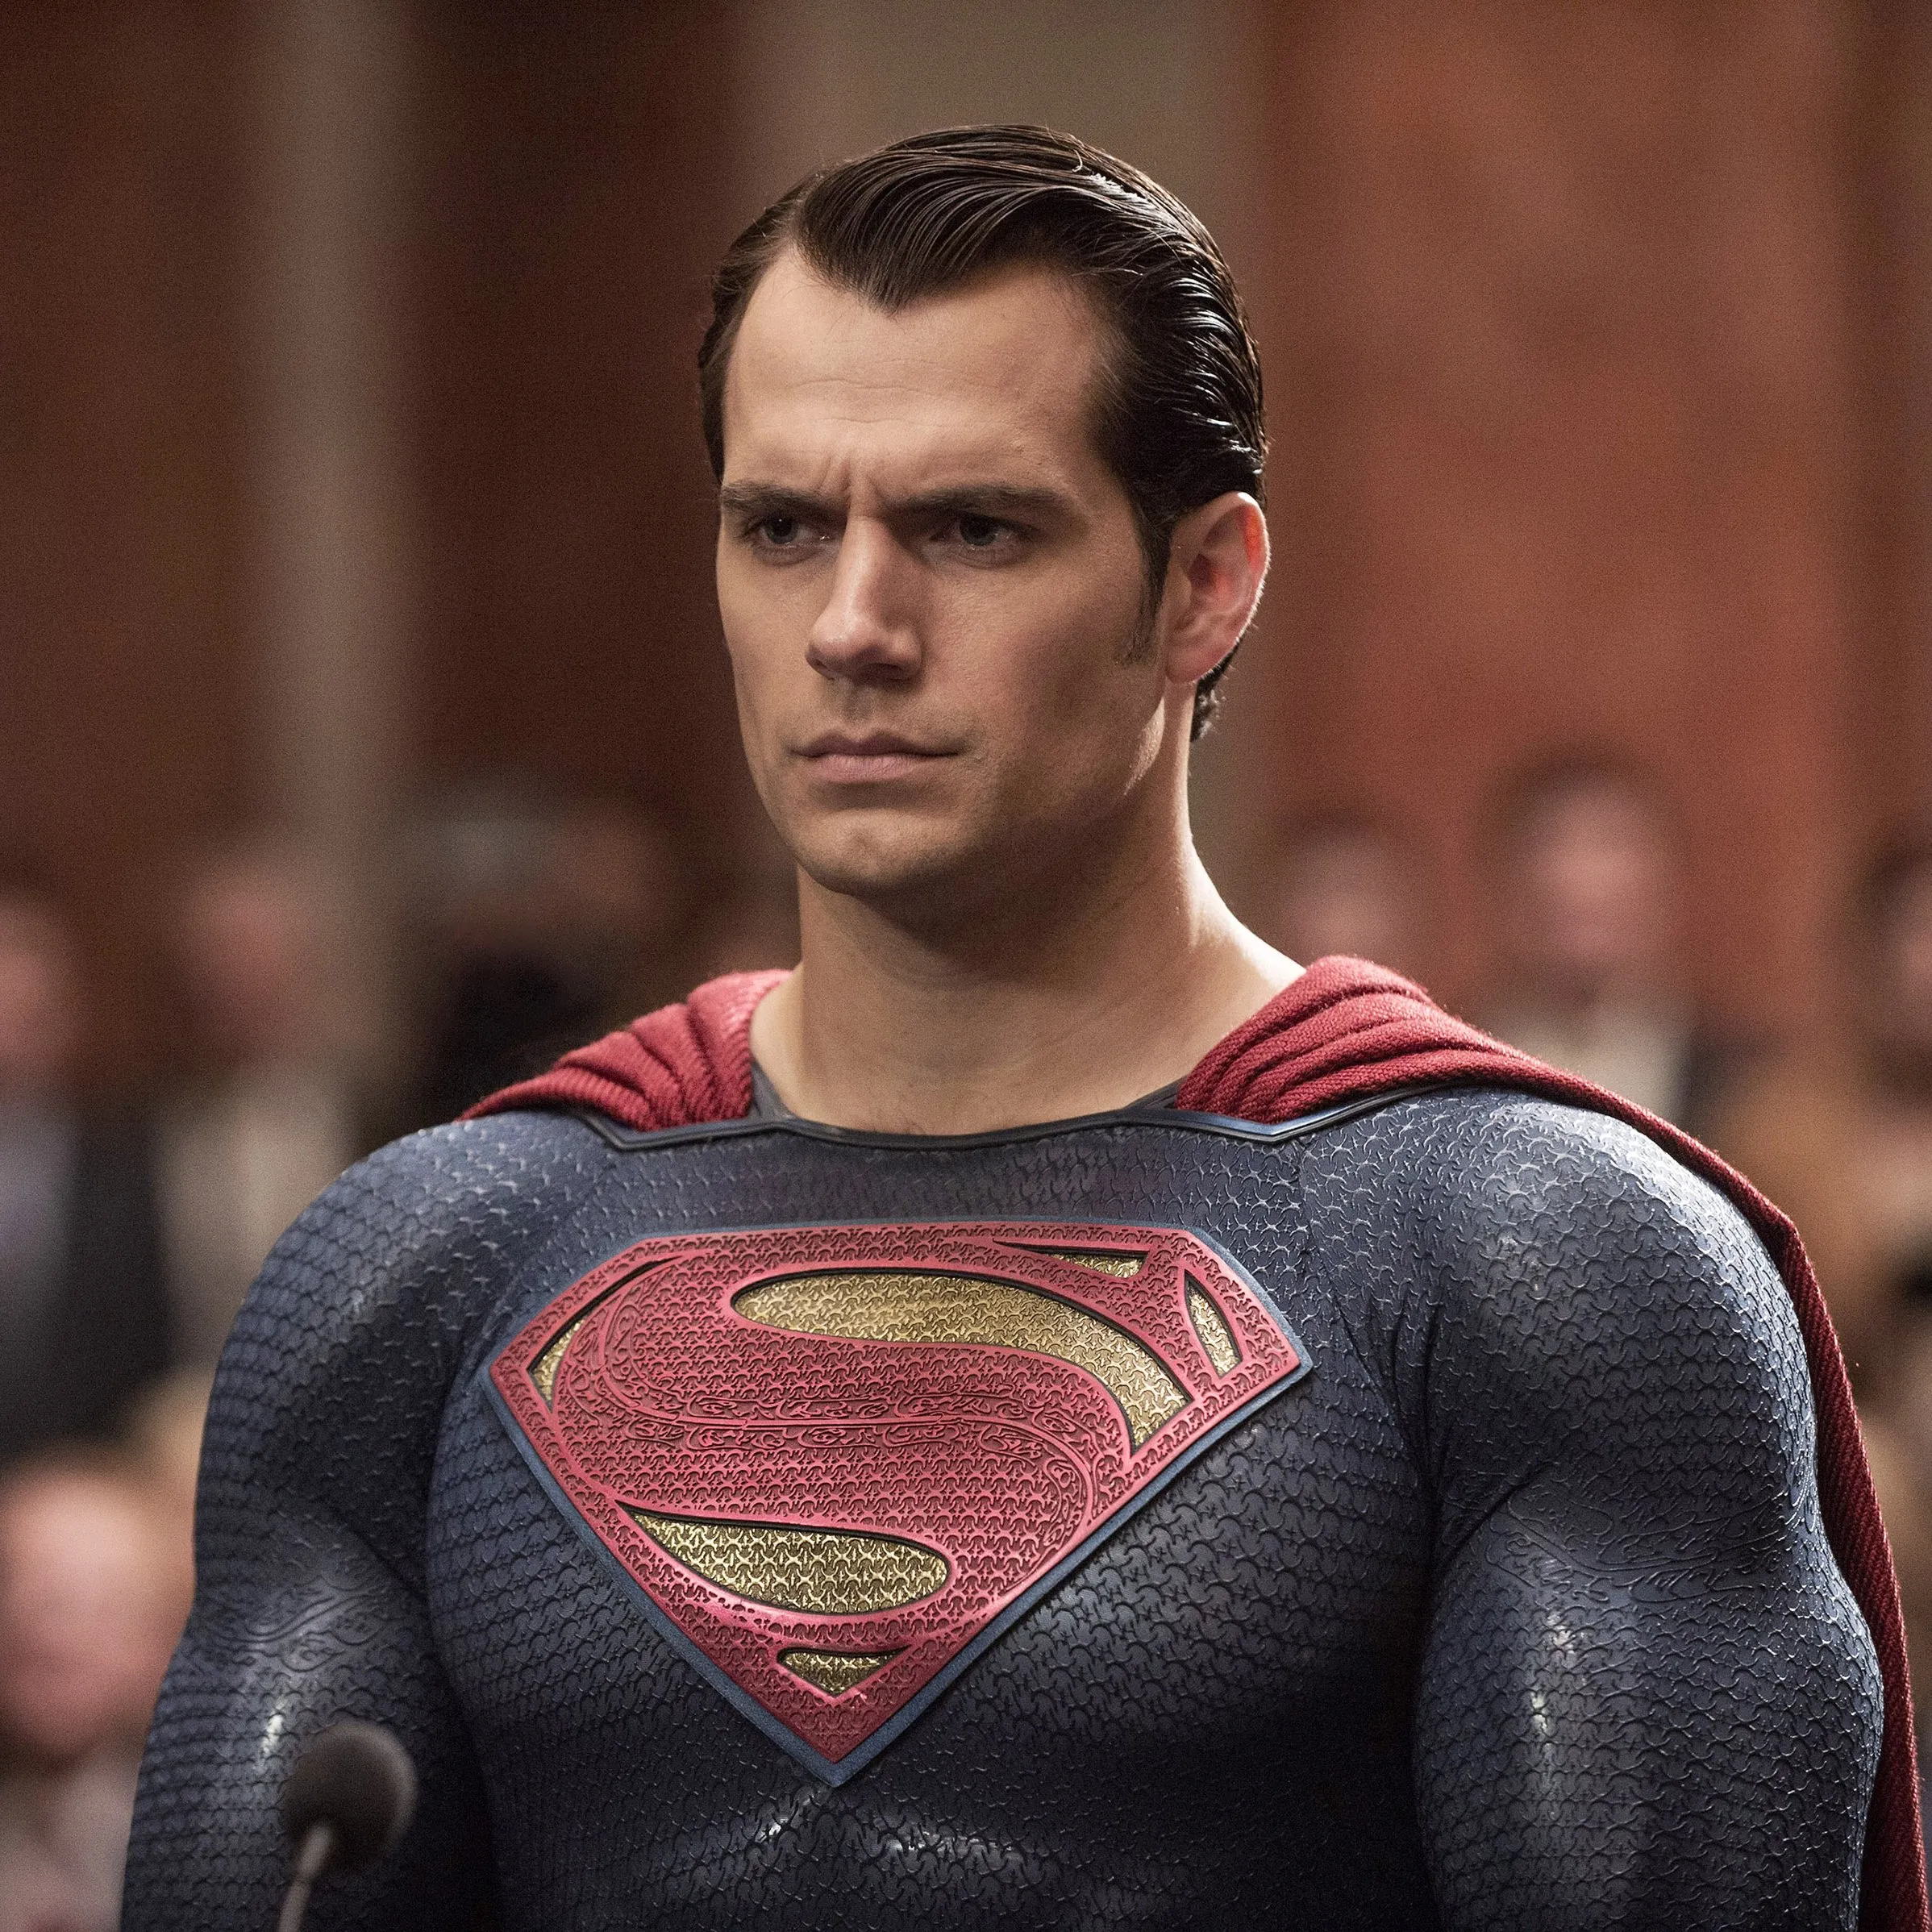 Warner Bros. CEO David Zaslav: There will be 4 DC movies to be released next year | FMV6